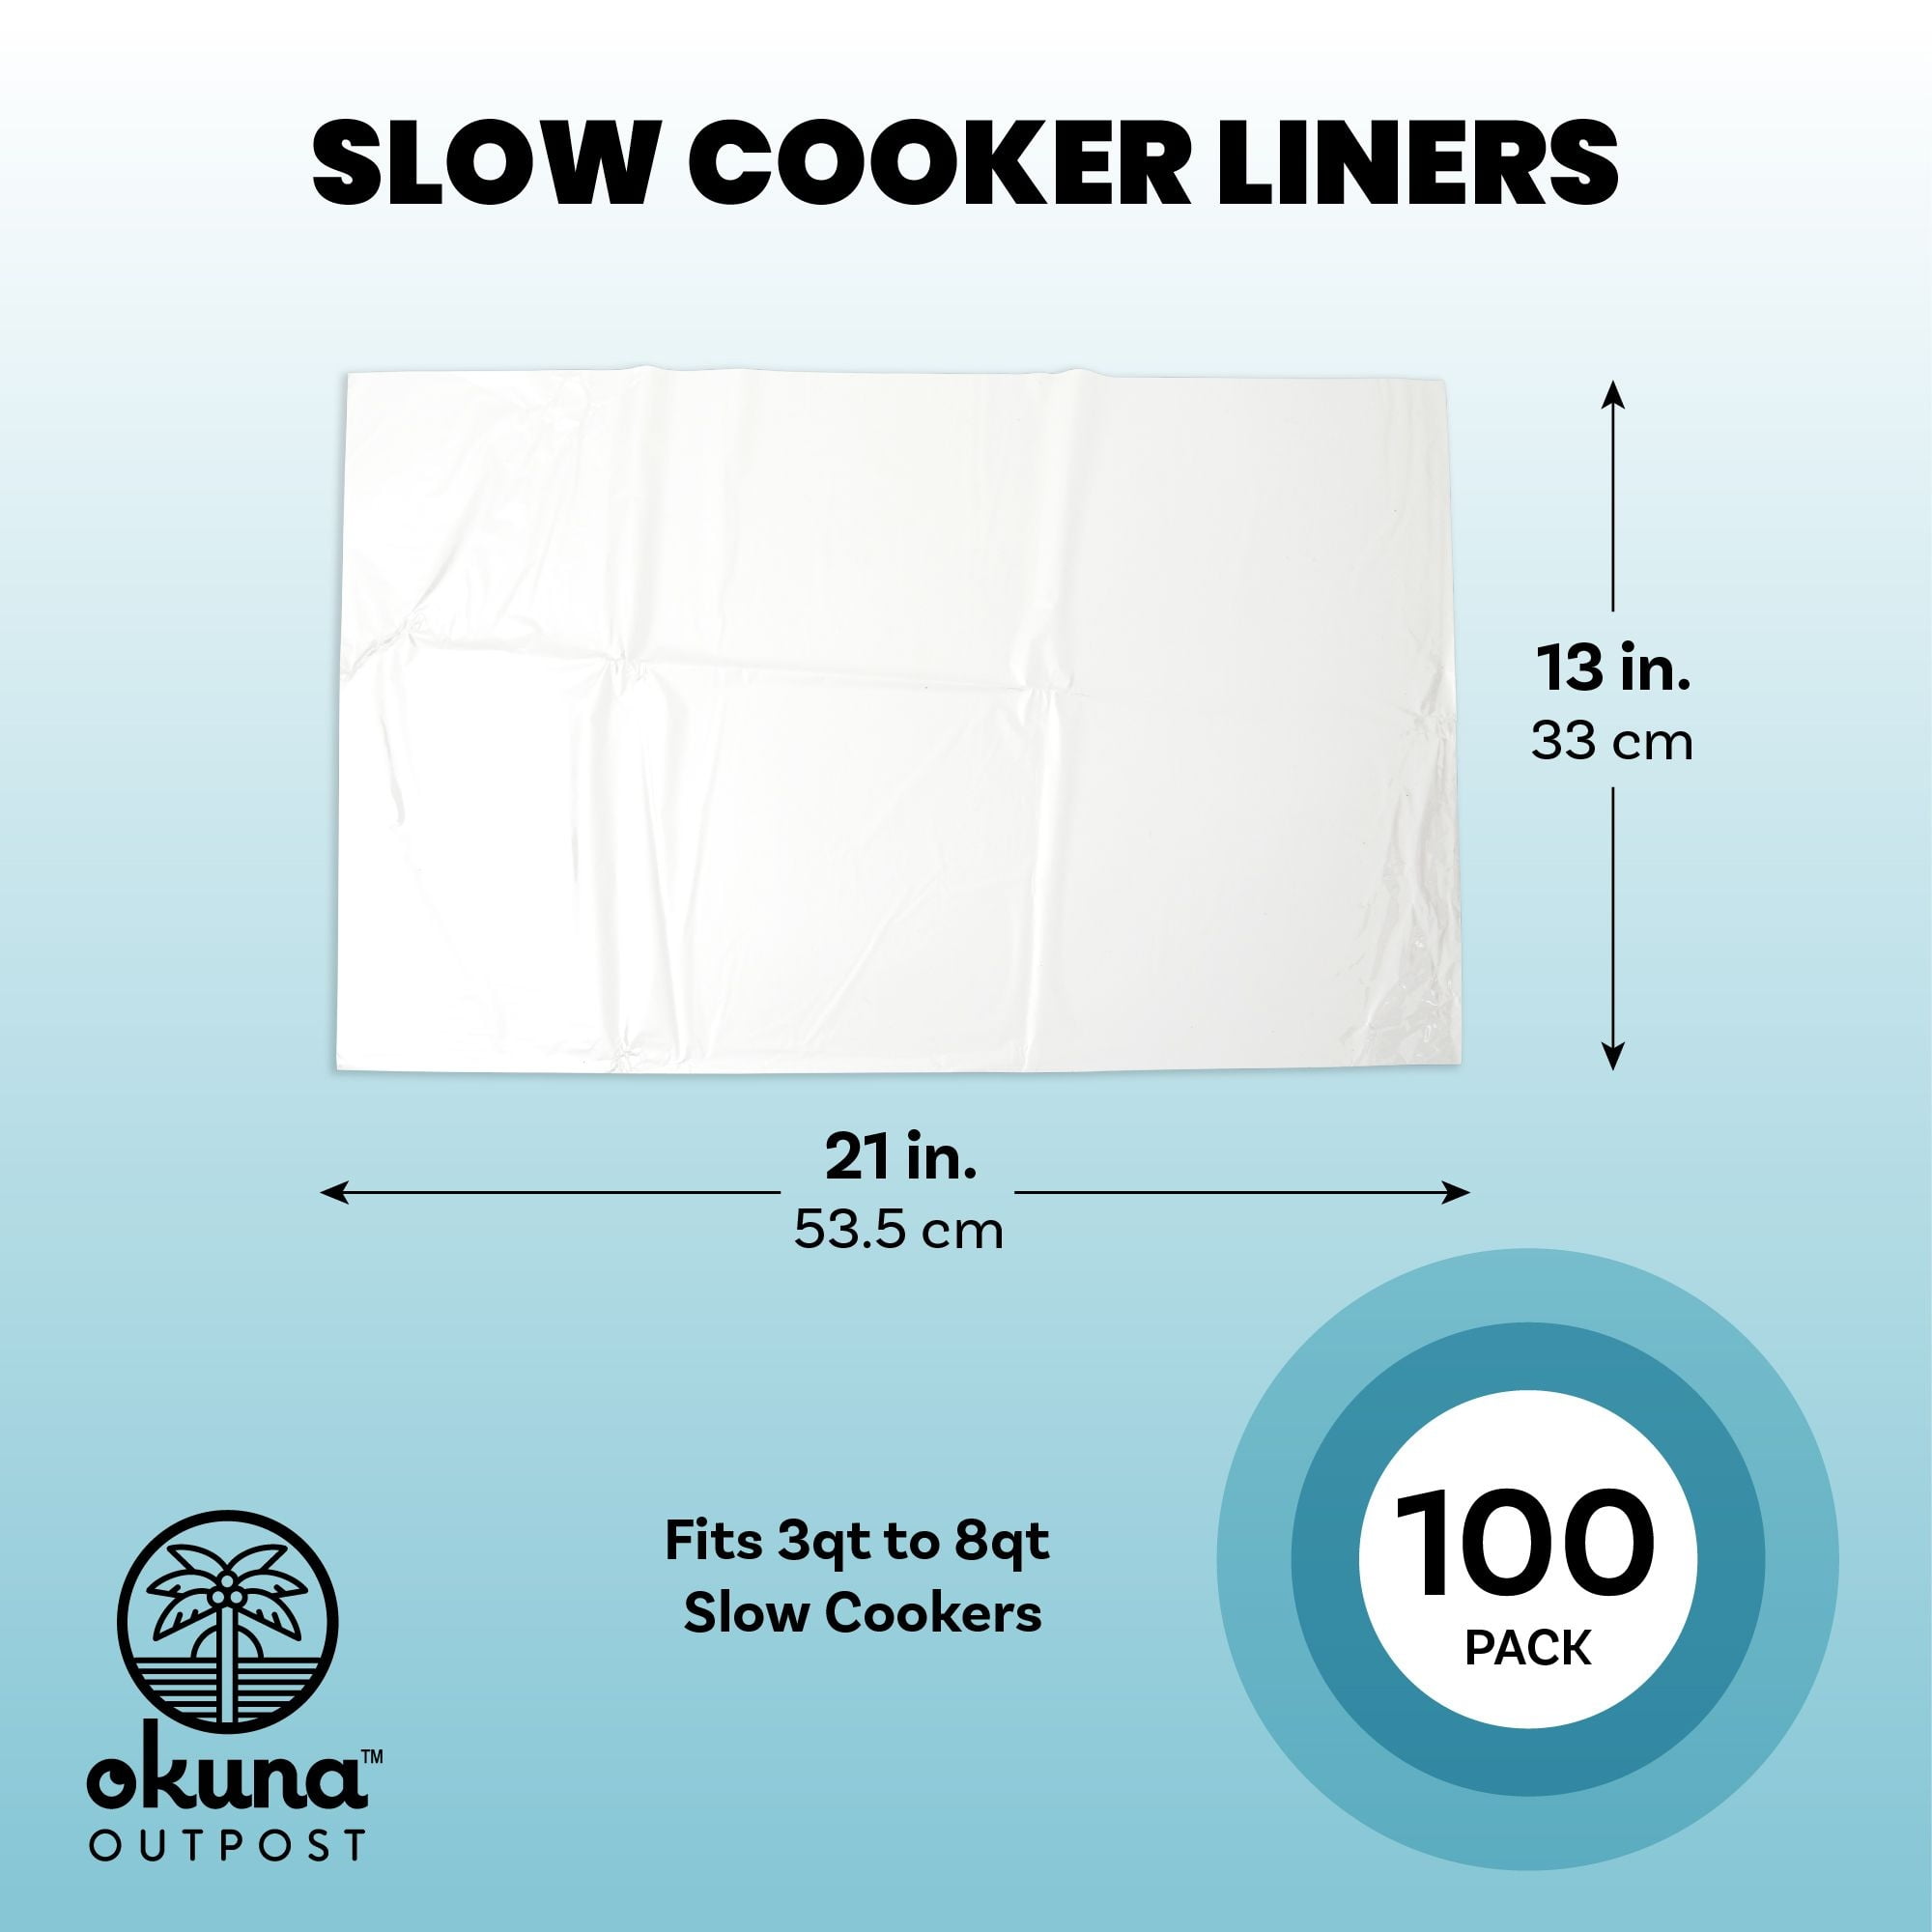 WRAPOK Slow Cooker Liners Kitchen Disposable Cooking Bags BPA Free for Oval  or Round Pot, Large Size 13 x 21 Inch, Fits 3 to 8.5 Quarts - 1 Pack (10